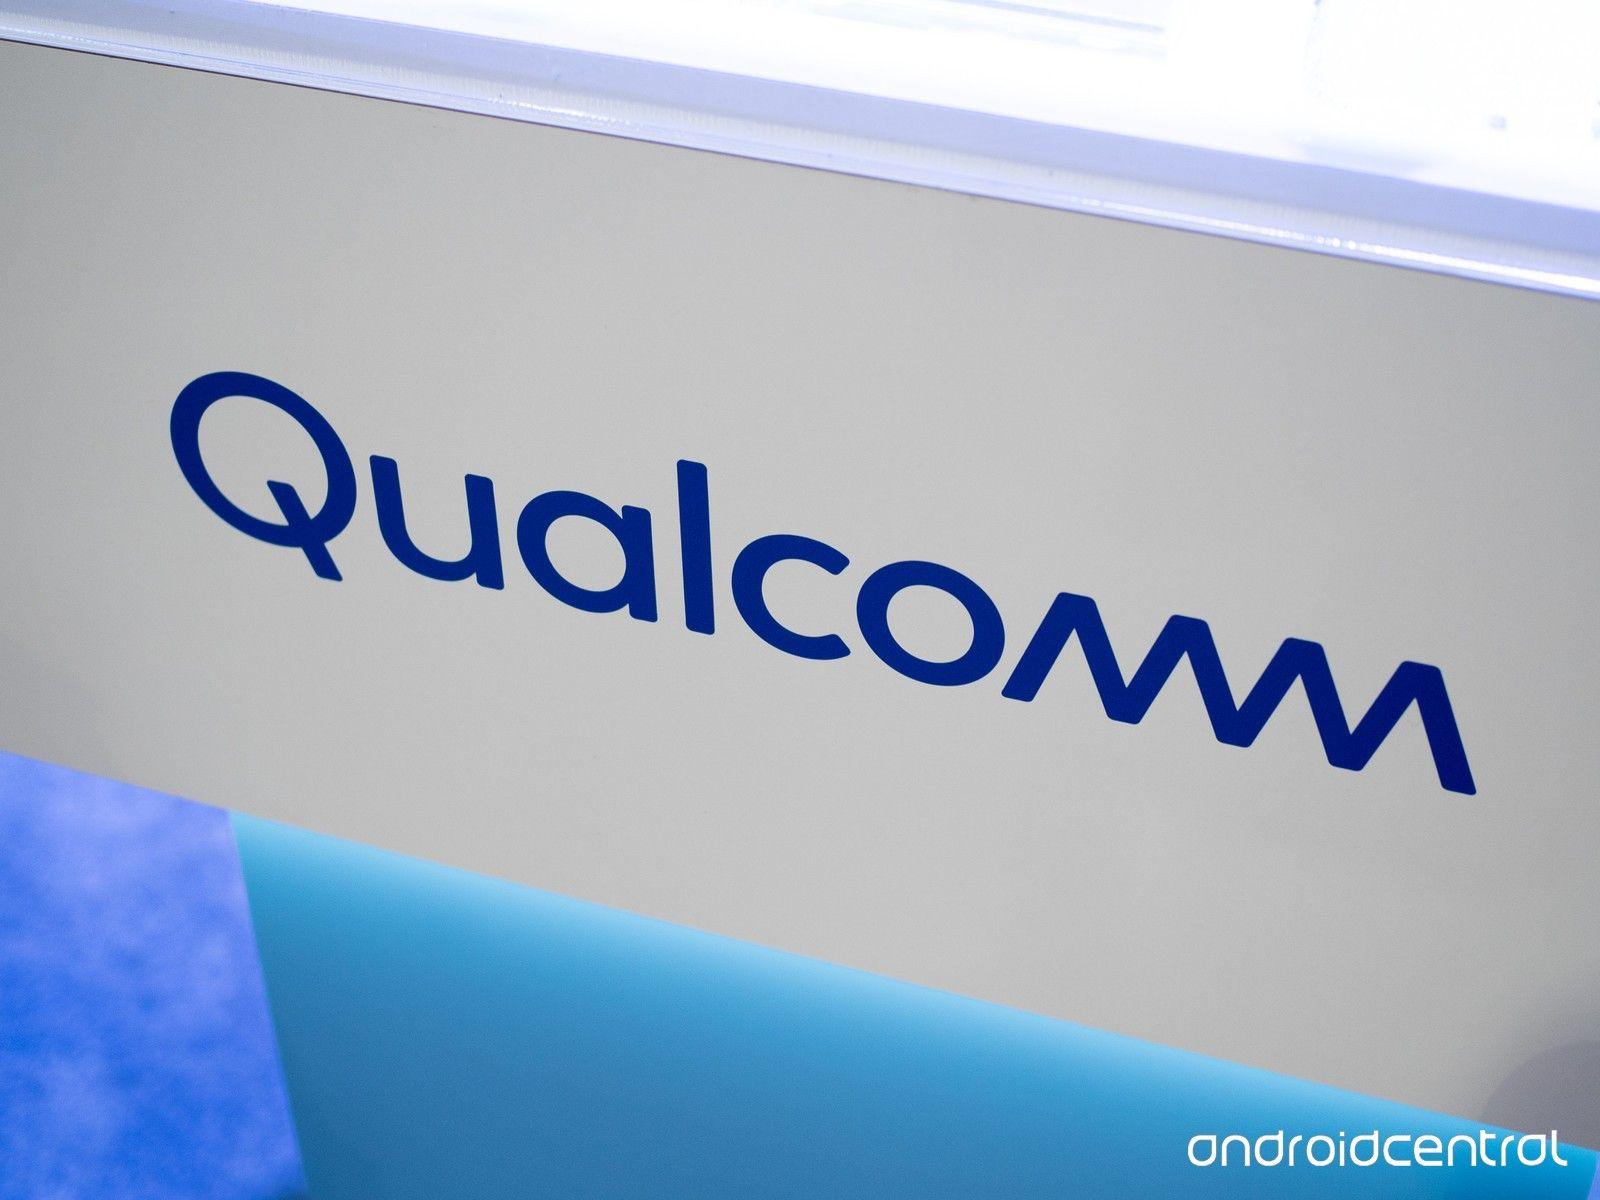 5G Qualcomm Logo - Qualcomm's simulated 5G tests show a 20x increase in download speeds ...